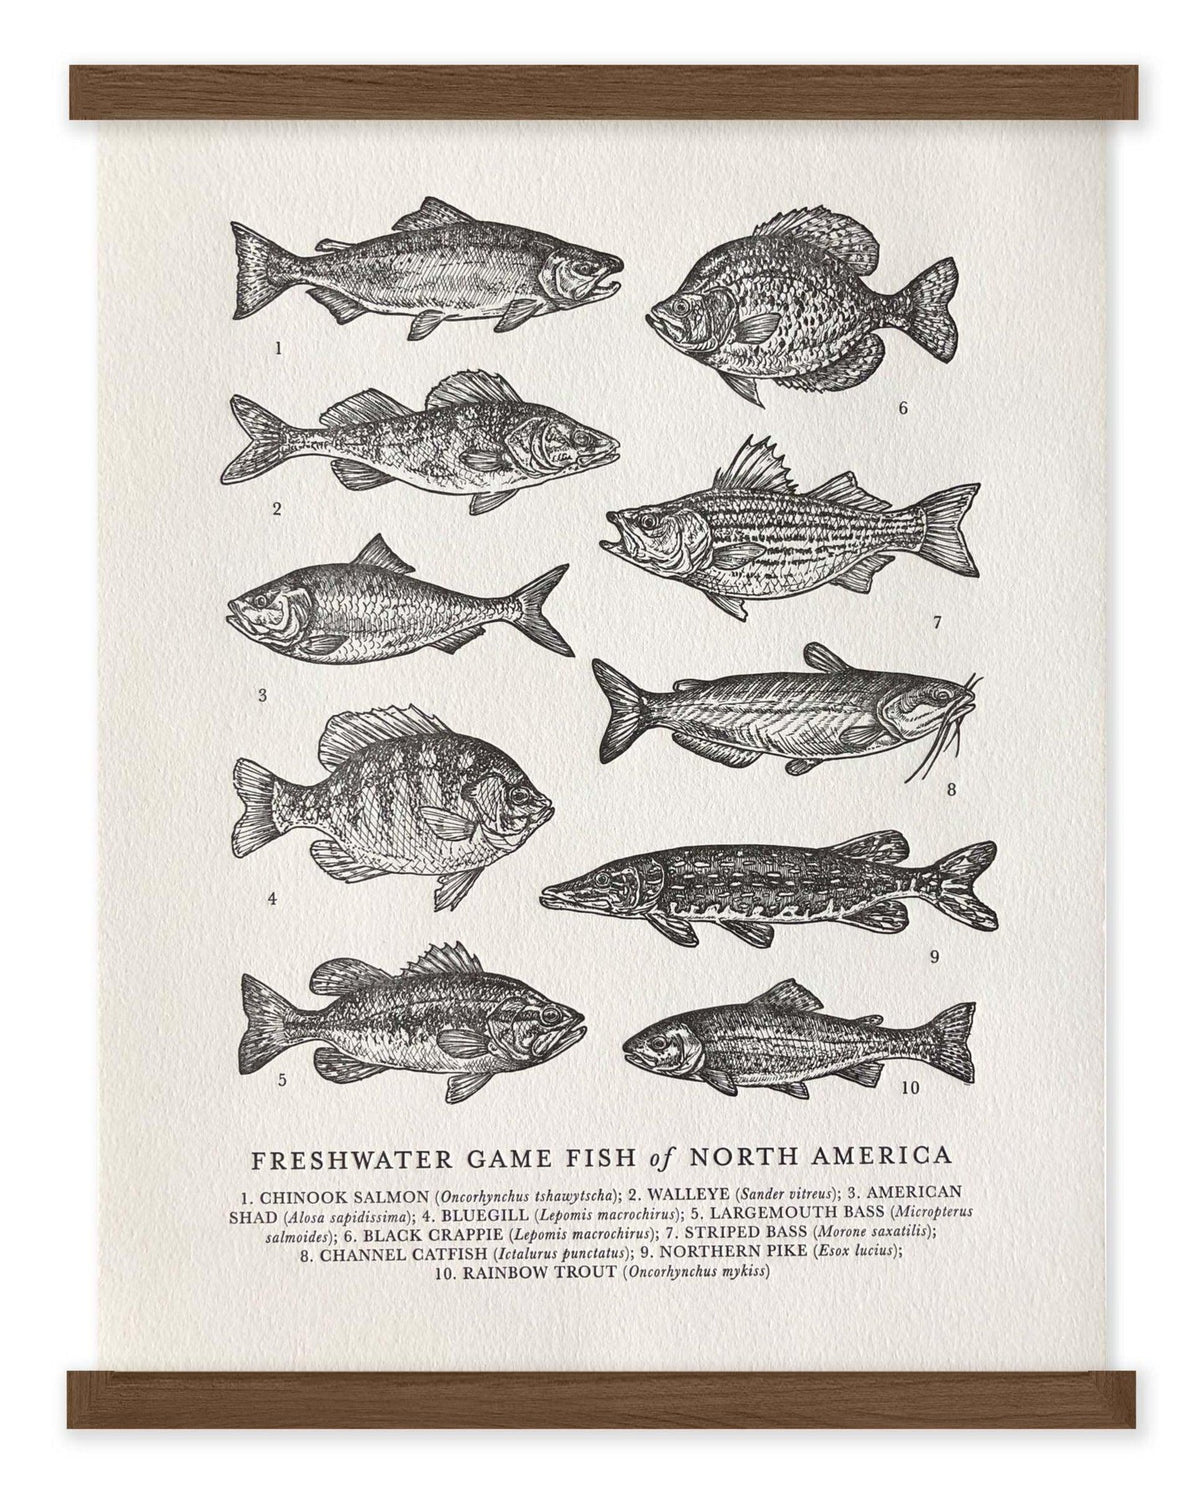 The Wild Wander Freshwater Game Fish Guide Letterpress Print.